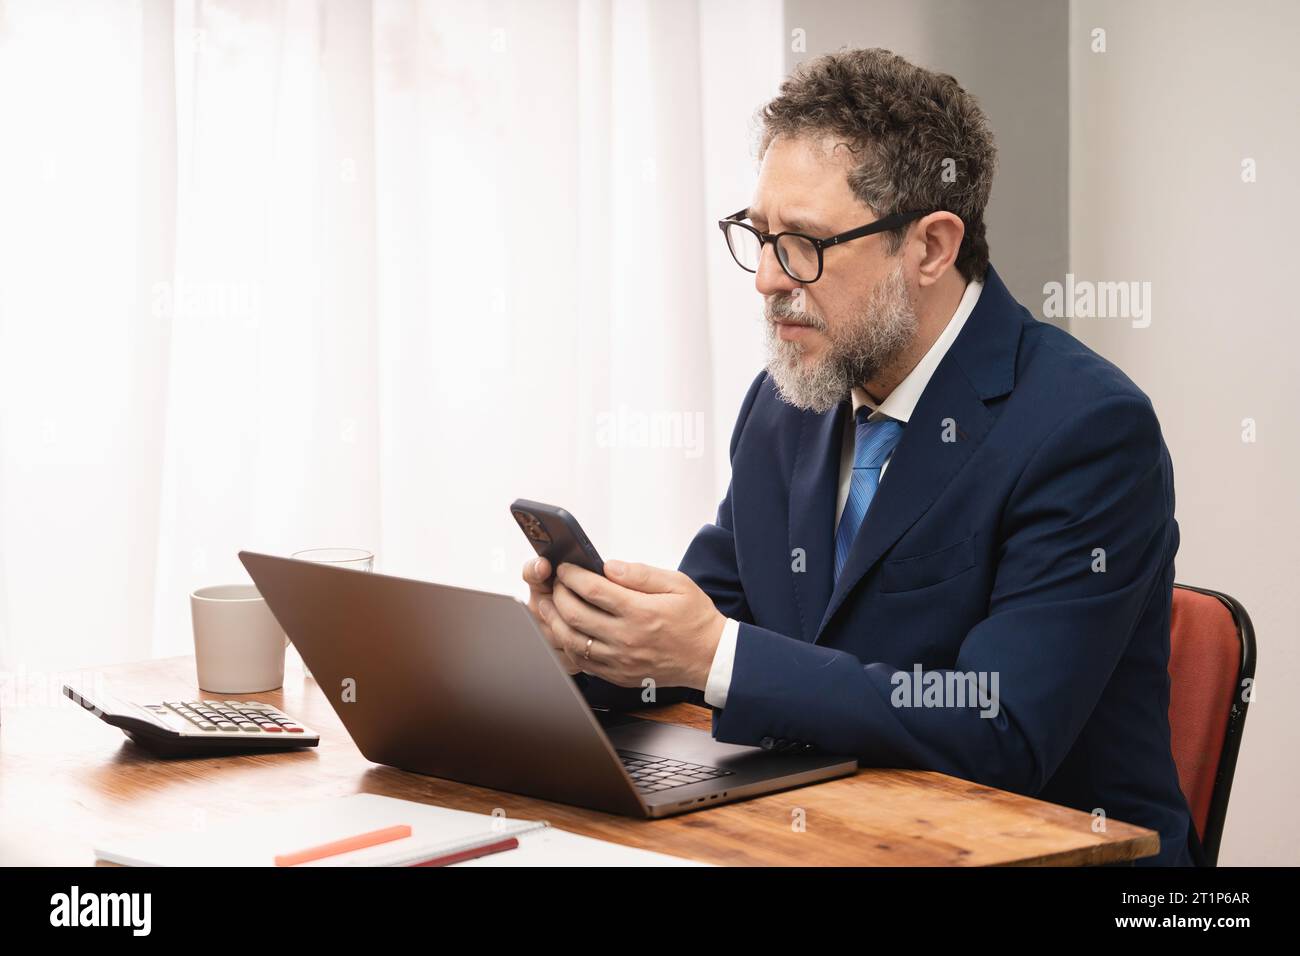 Mature businessman in blue blazer attentively checking messages on his smartphone in a well-lit office. Stock Photo